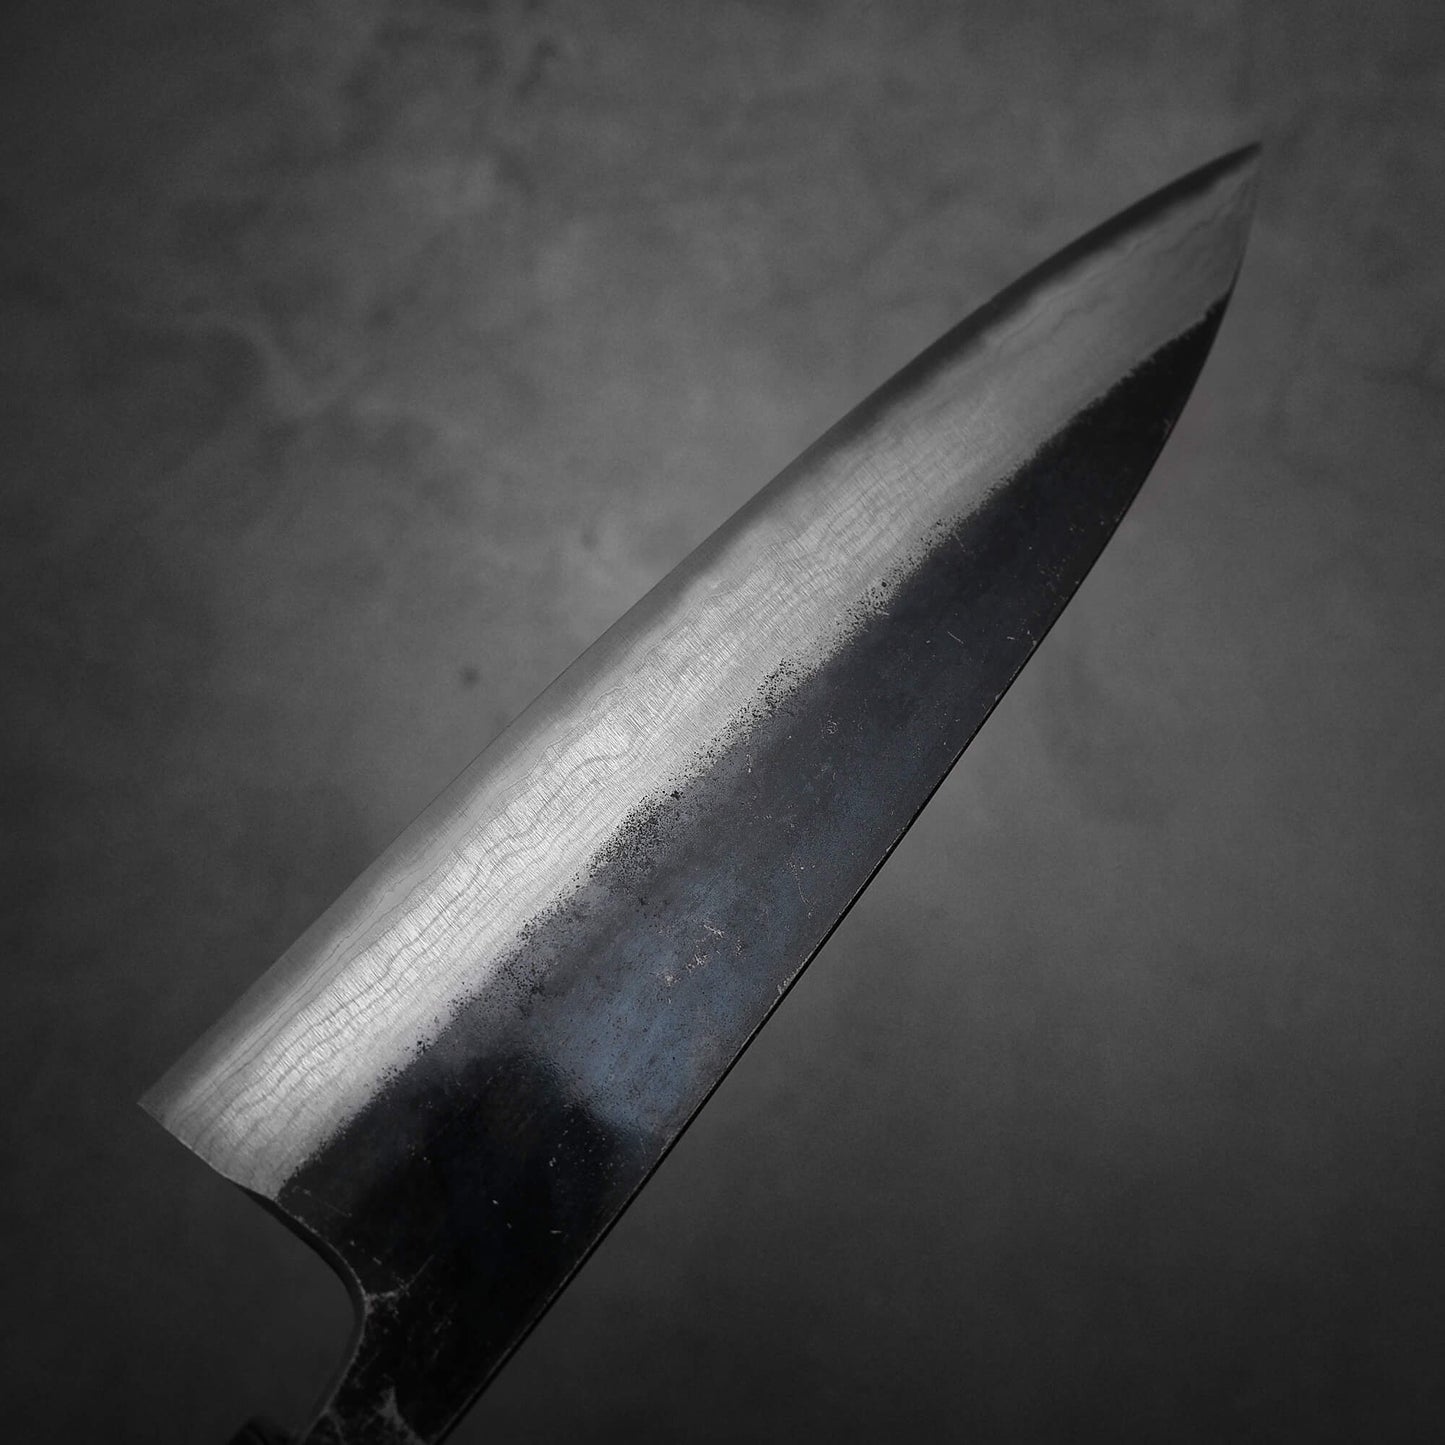 Top view of the blade of Hatsukokoro Kumokage gyuto knife. Image focuses on the left side of the blade